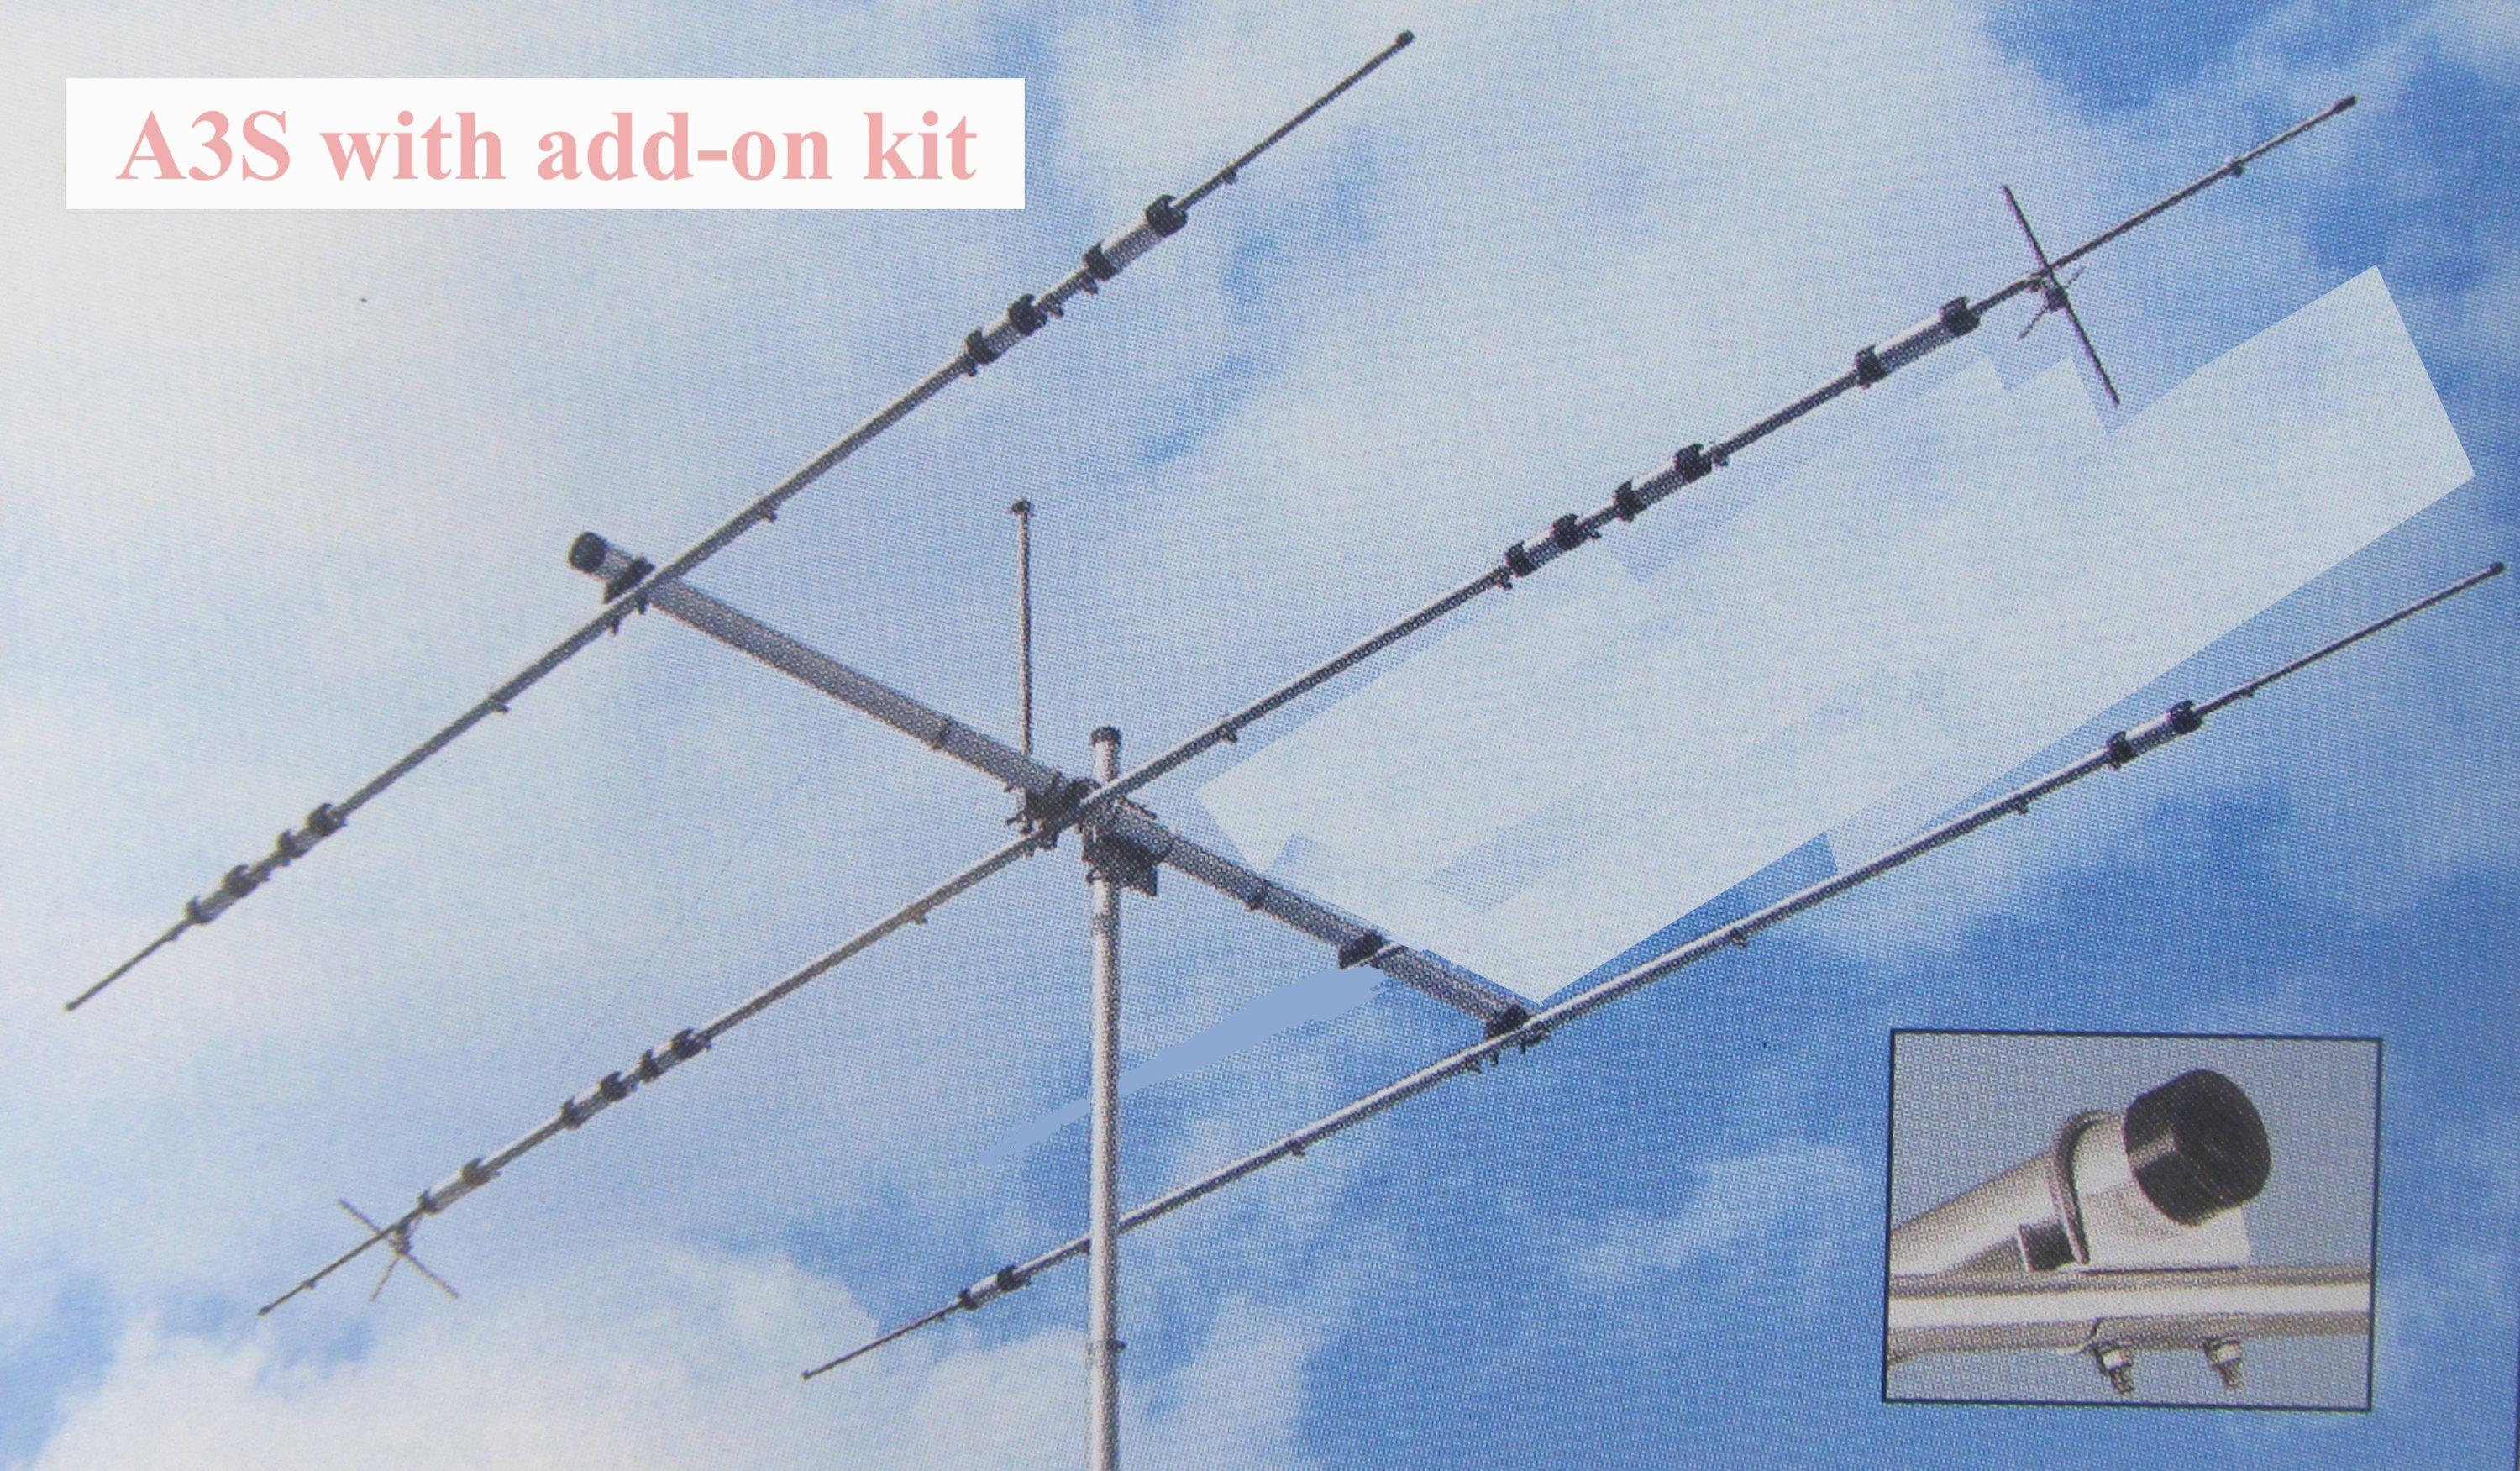 Cushcraft a-743 7,10mhz add-on kit for a3s